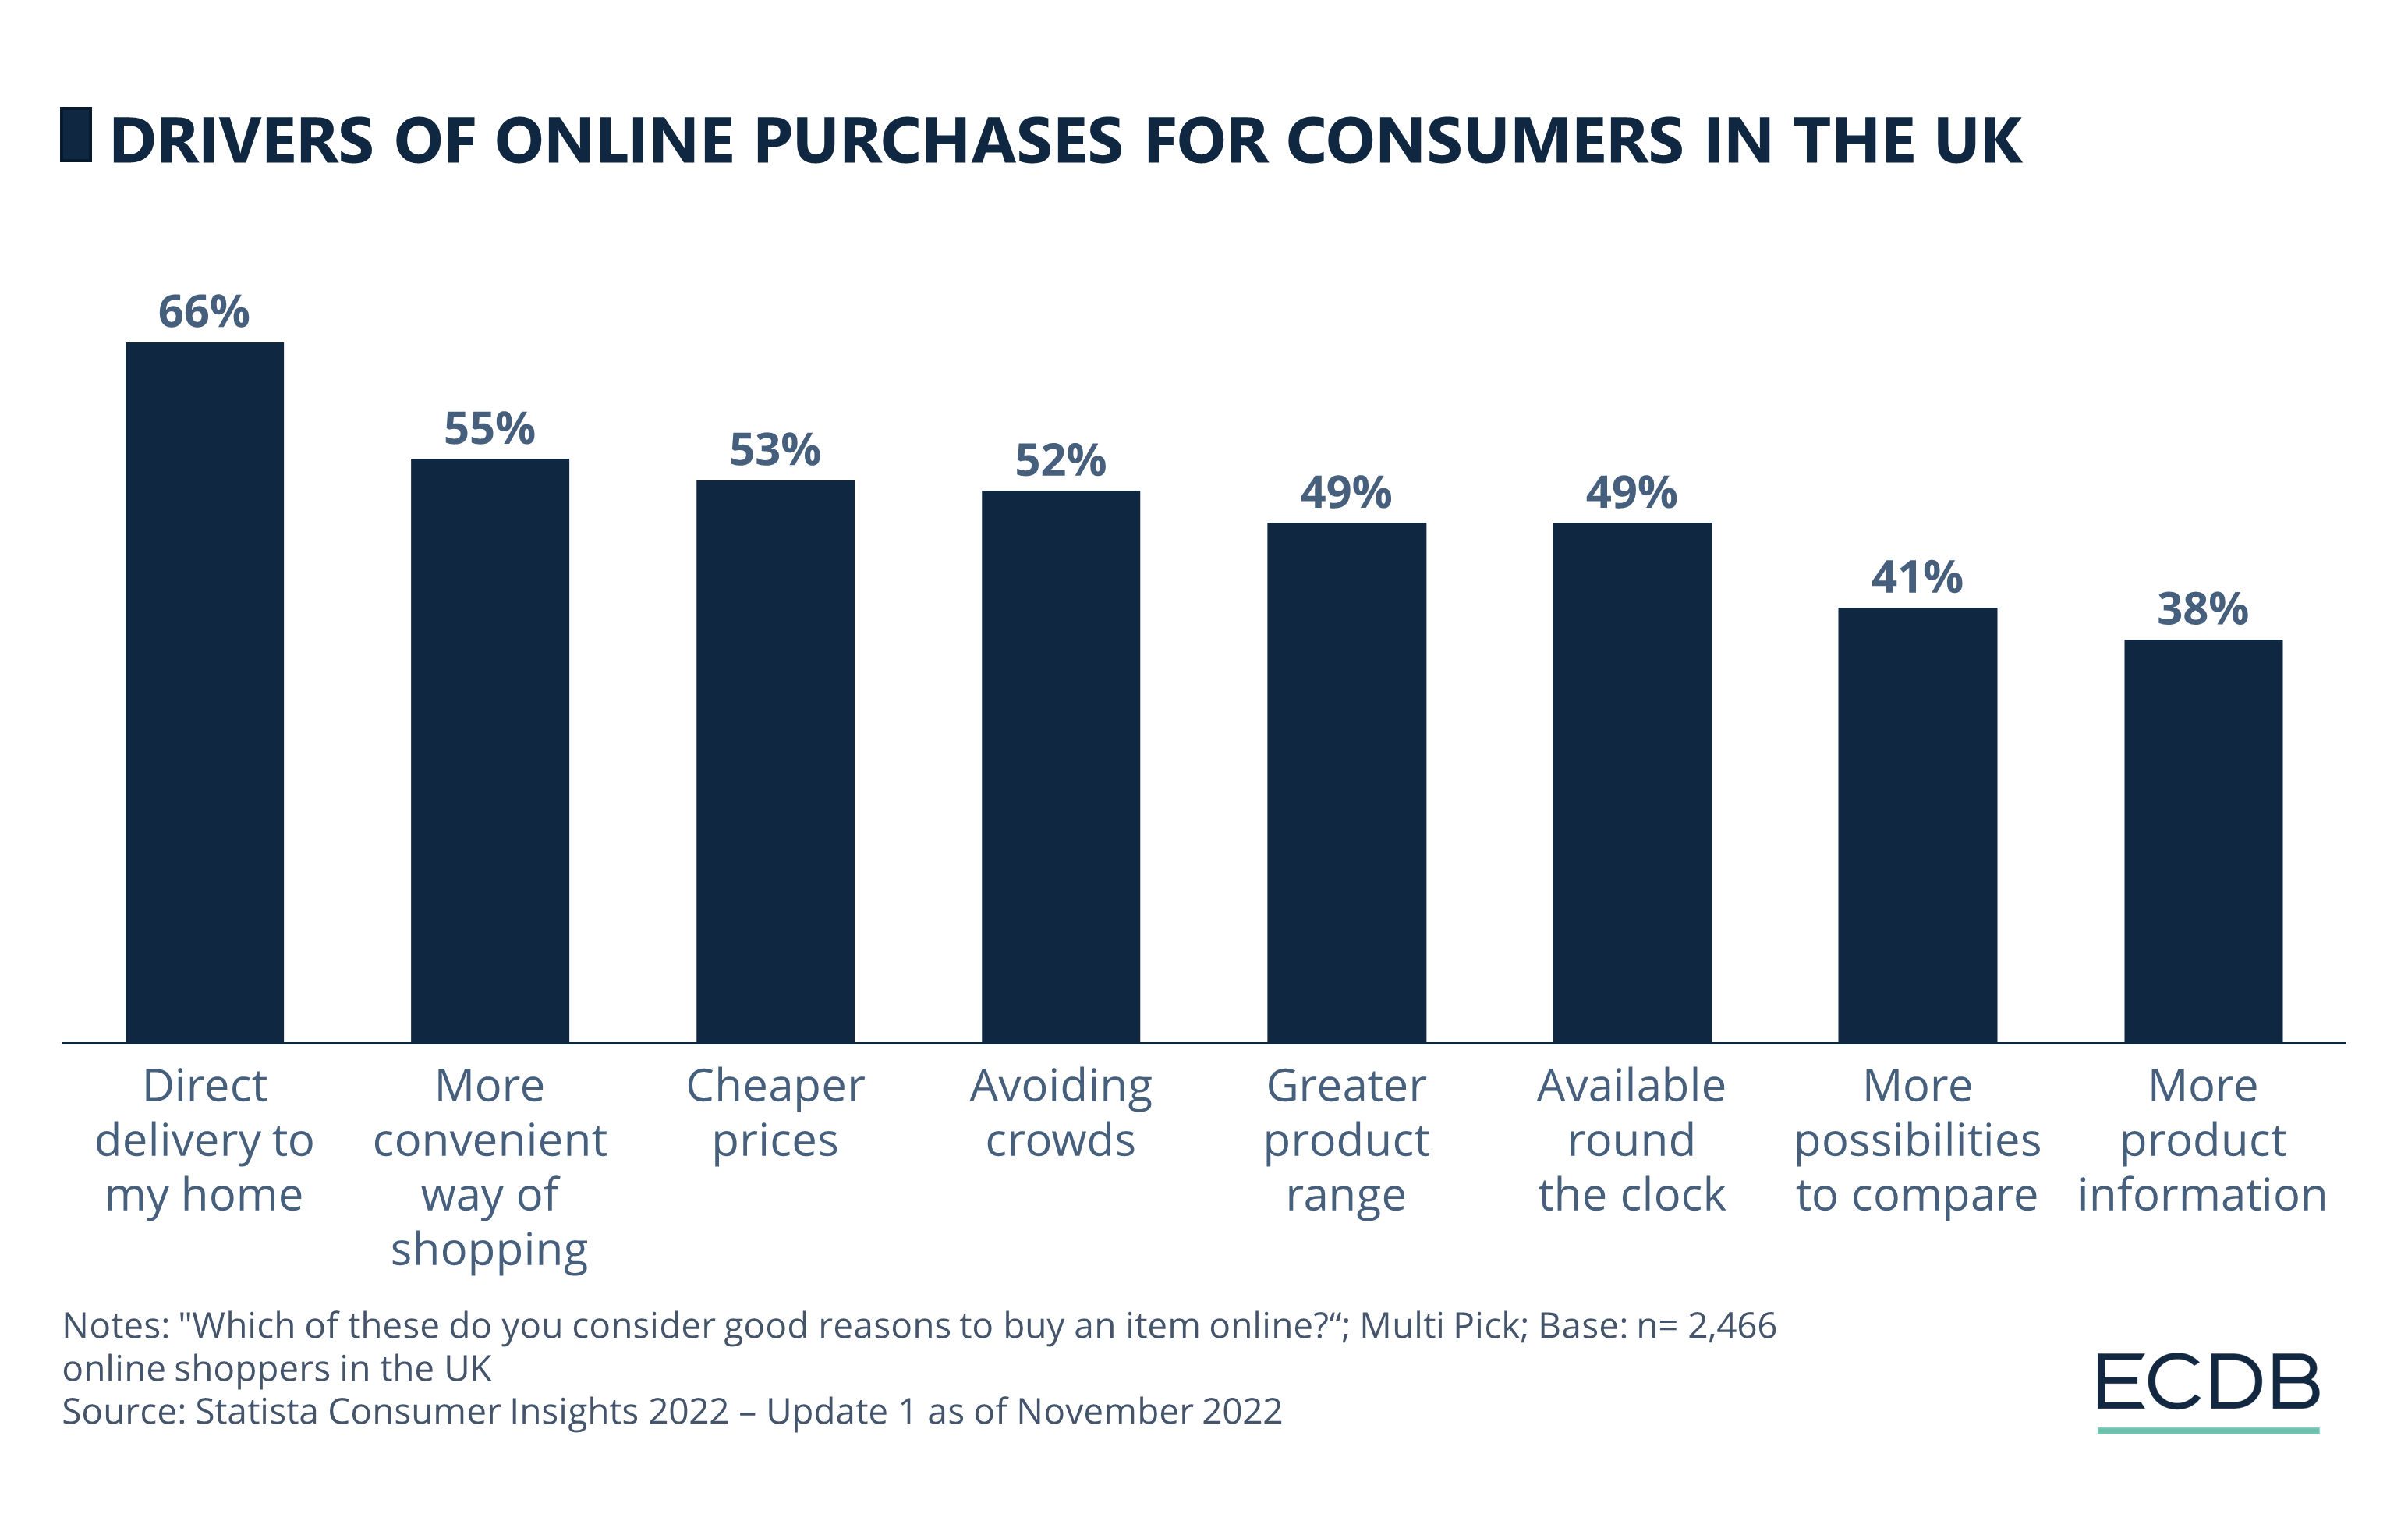 Drivers of Online Purchases for Consumers in the UK